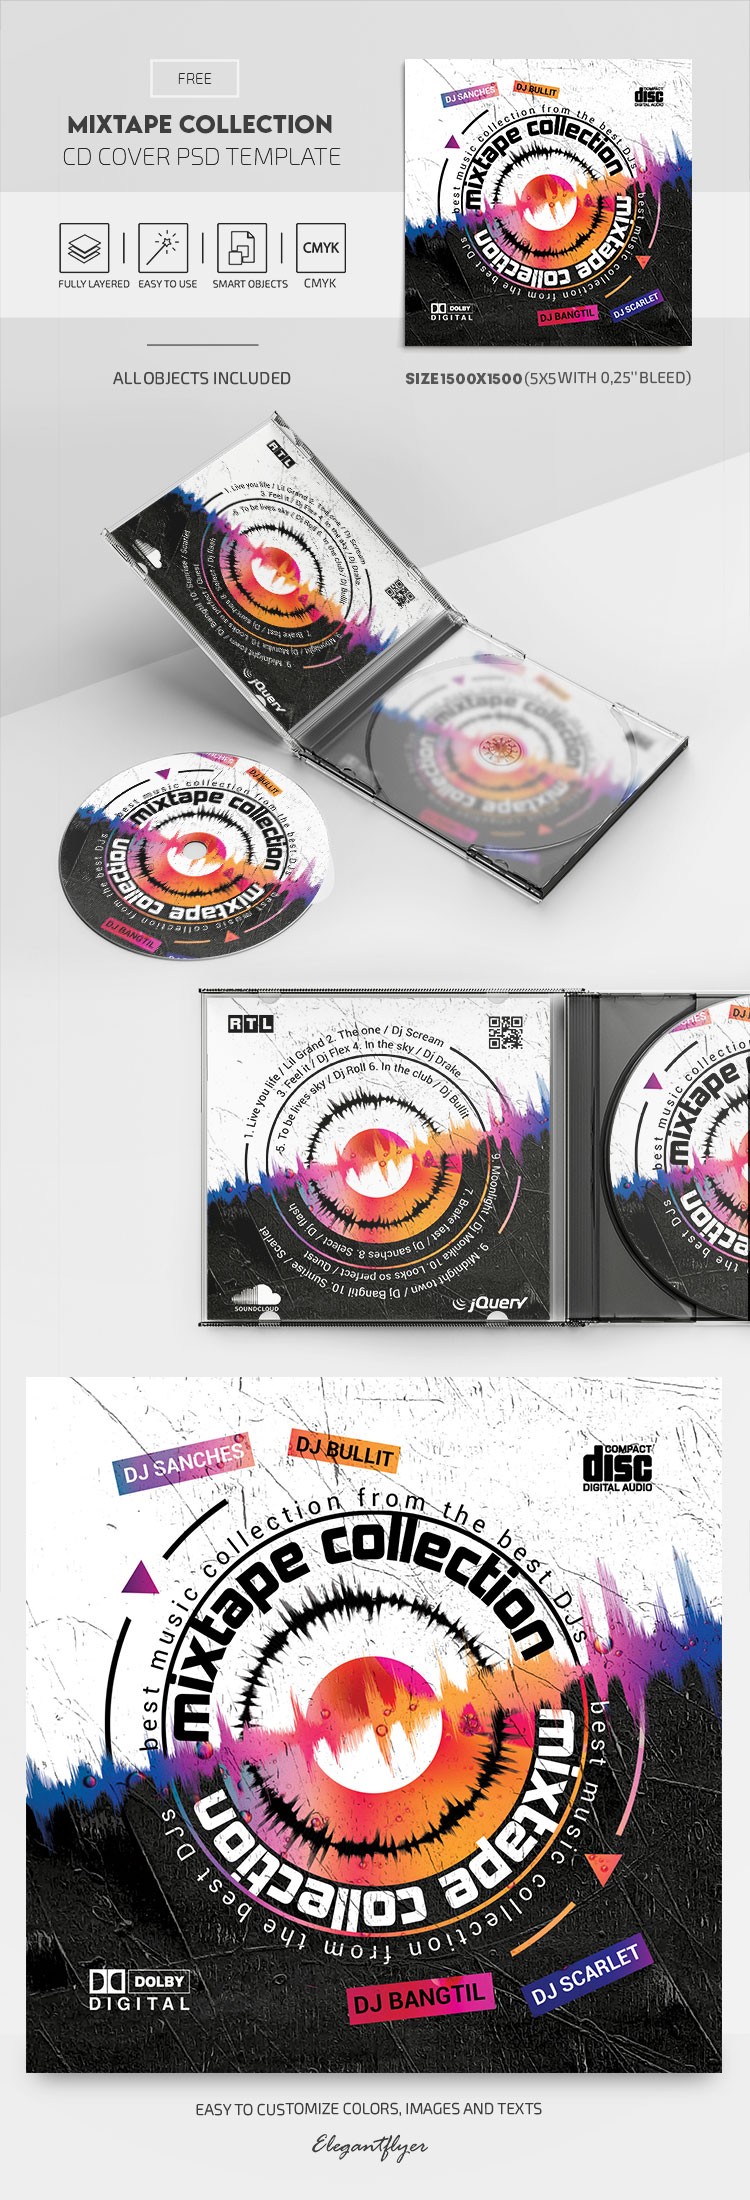 Mixtape Collection CD Cover by ElegantFlyer